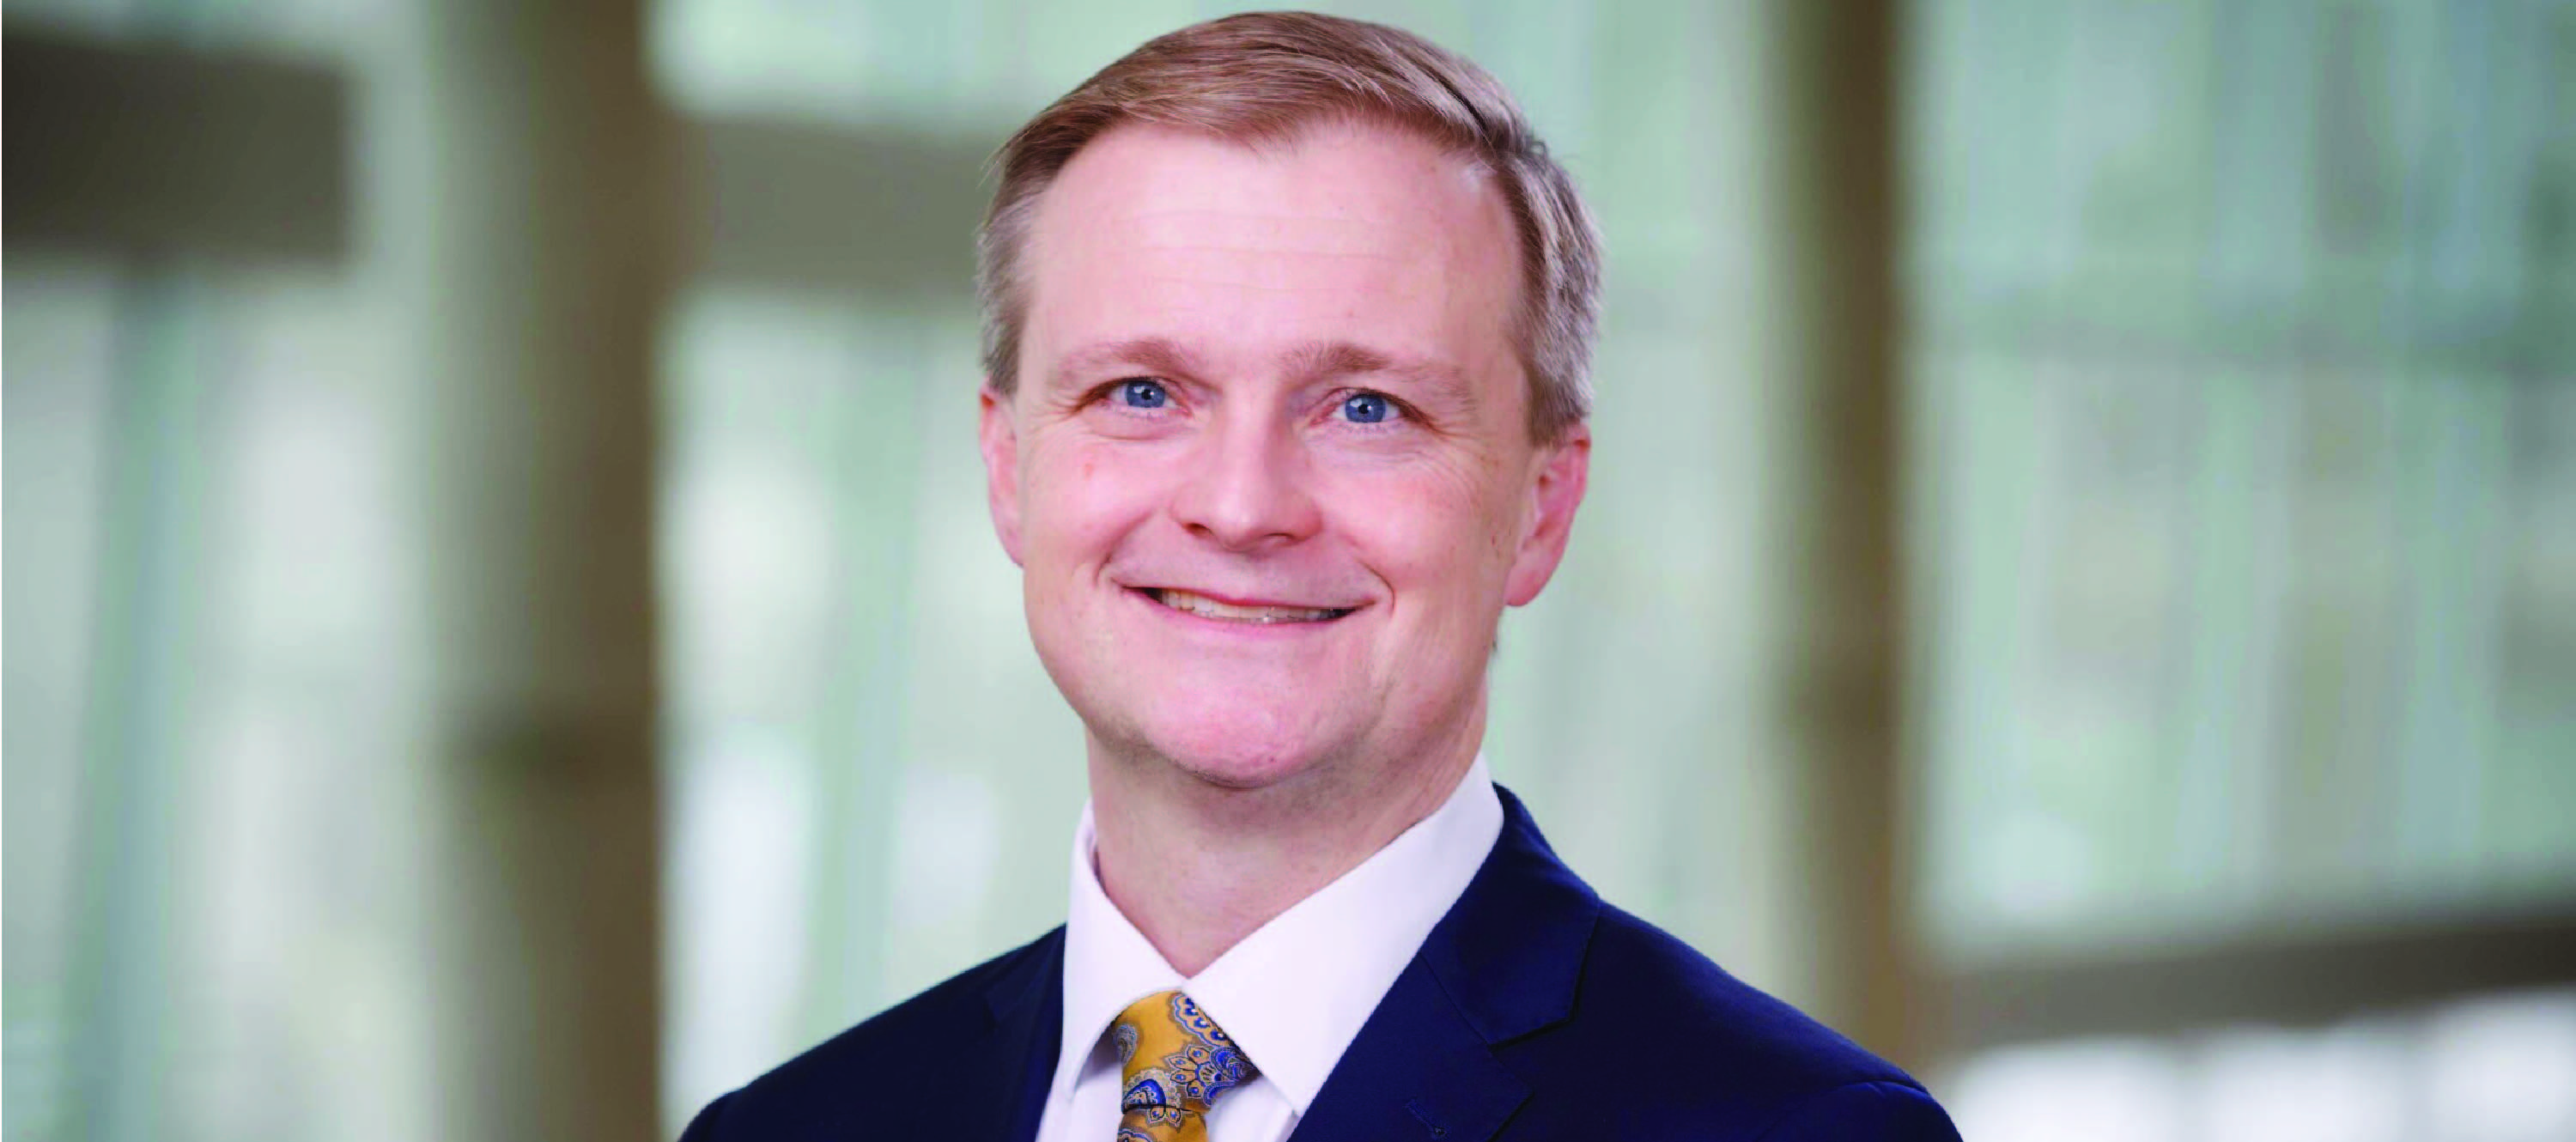 Dr. McCulloh named associate vice chancellor for clinical research